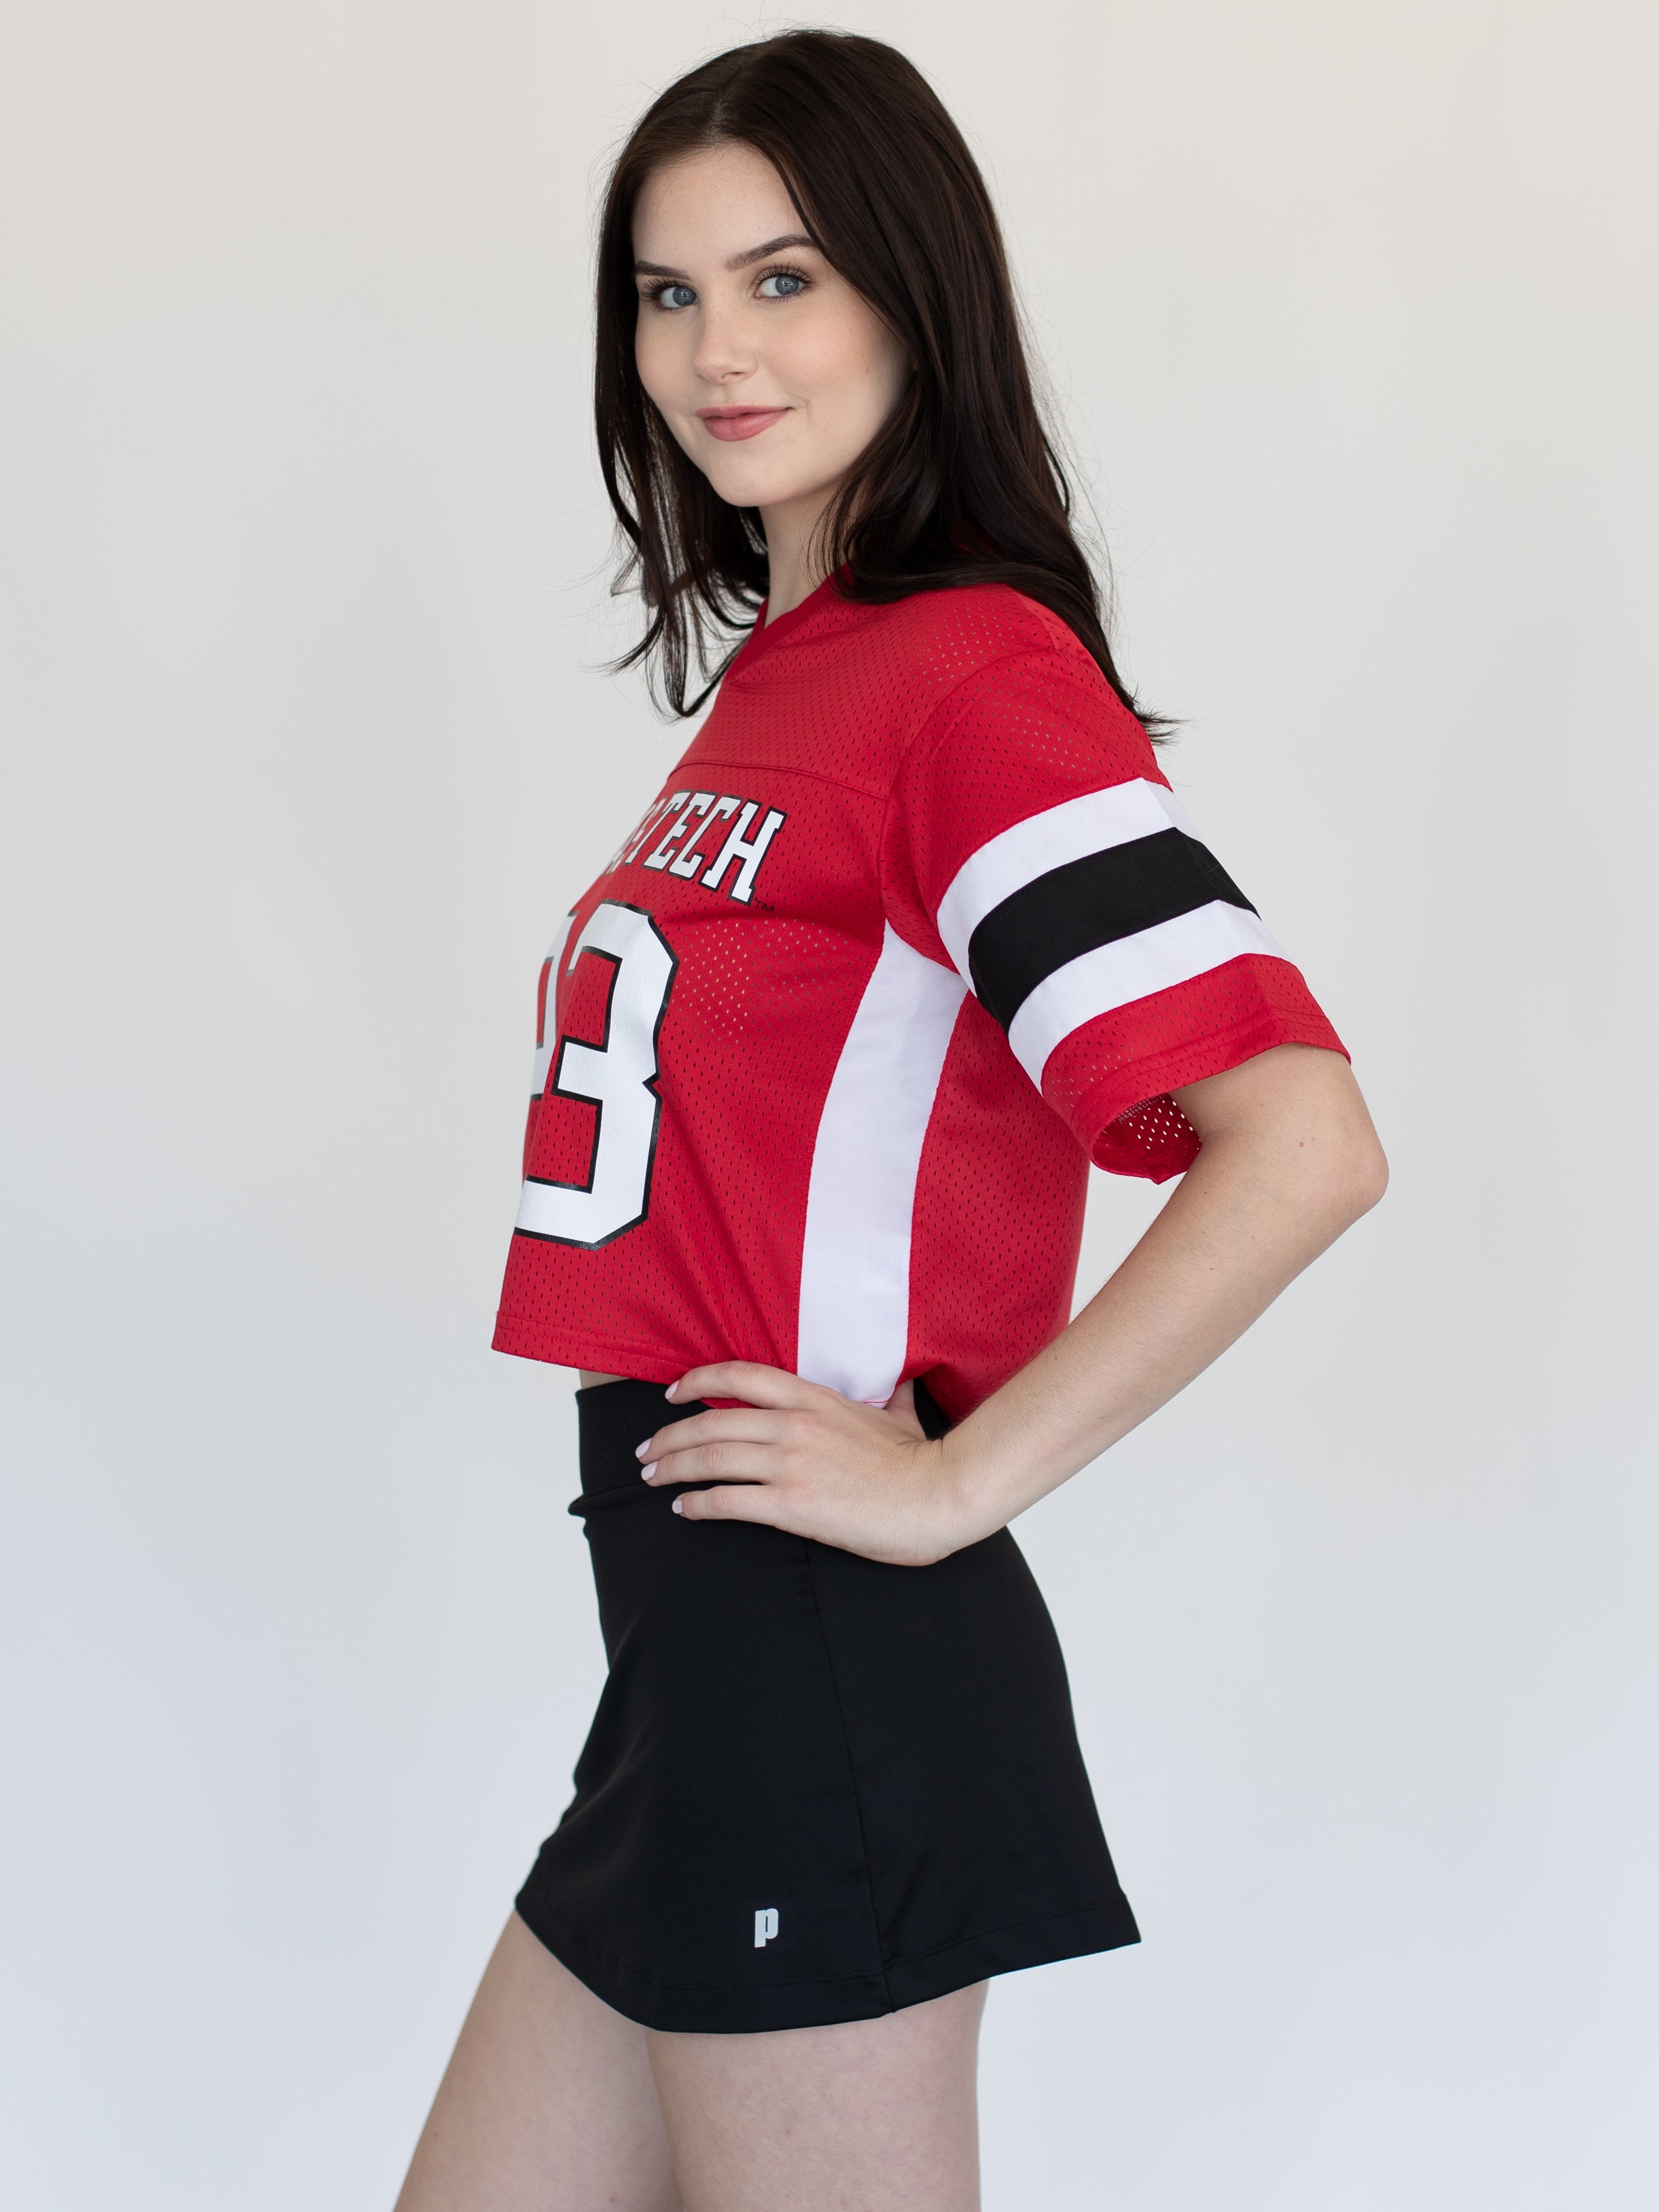 Texas Tech Dark Horse Vintage Football Mesh Fashion Jersey Longsleeve in White, Size: M, Sold by Red Raider Outfitters